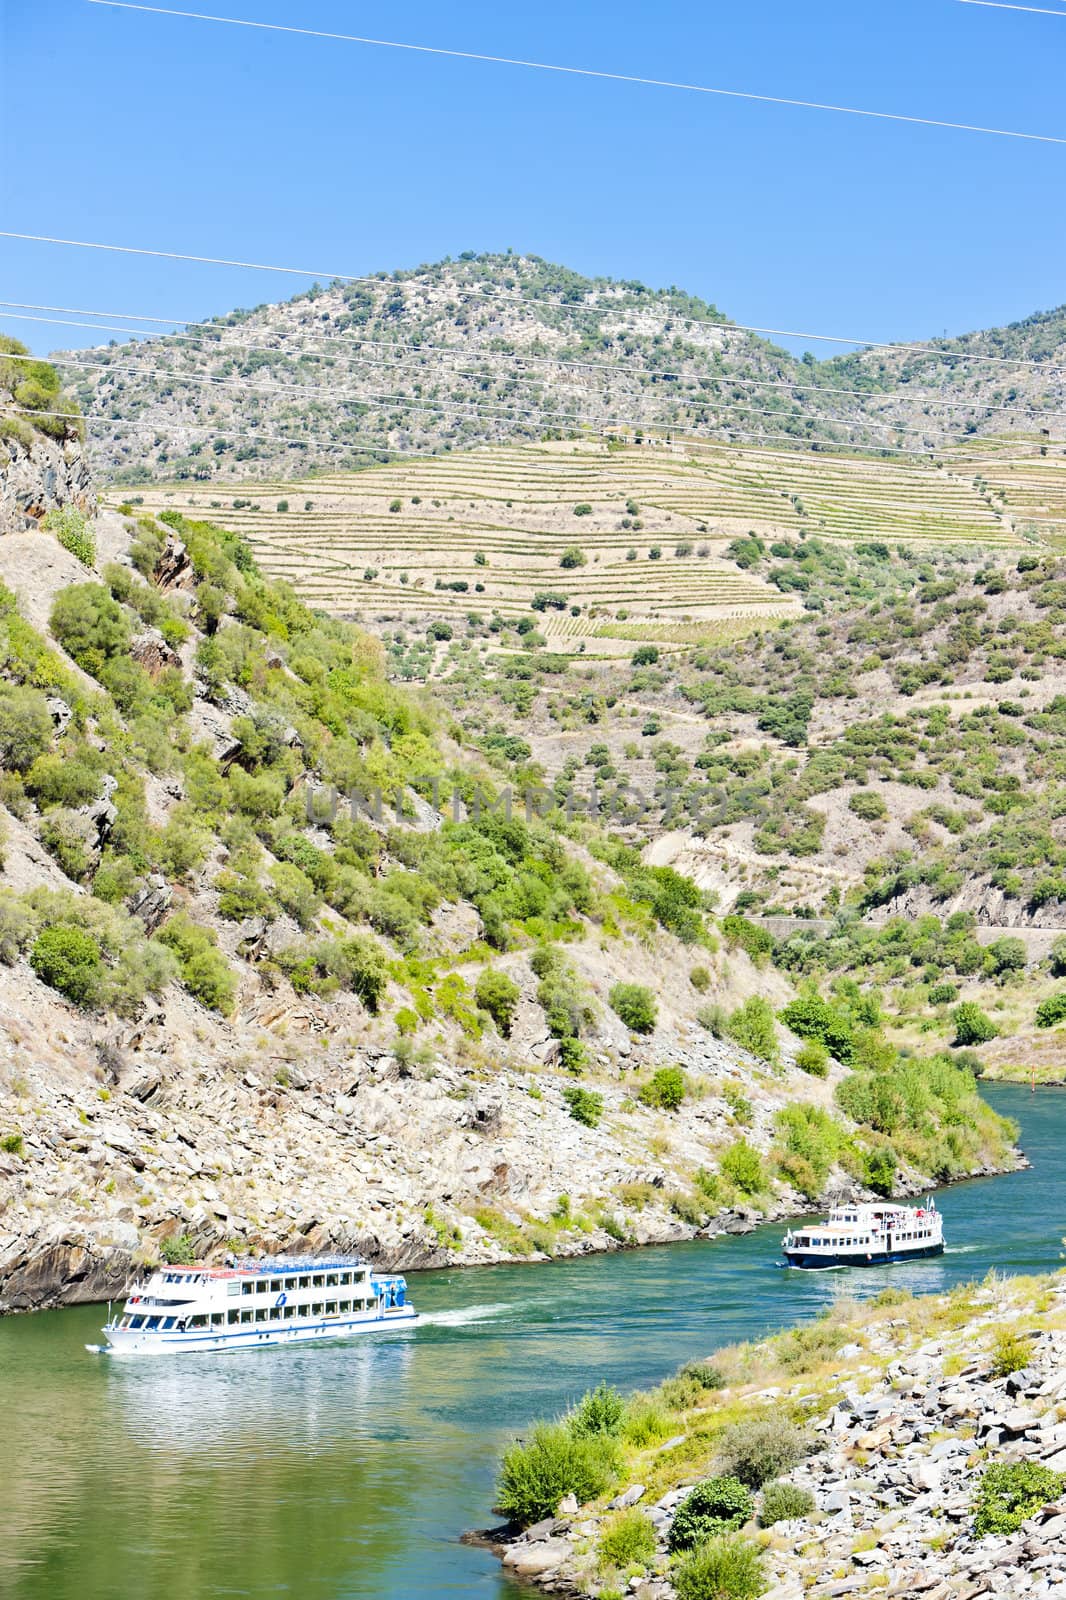 cruise ships in Douro Valley, Portugal